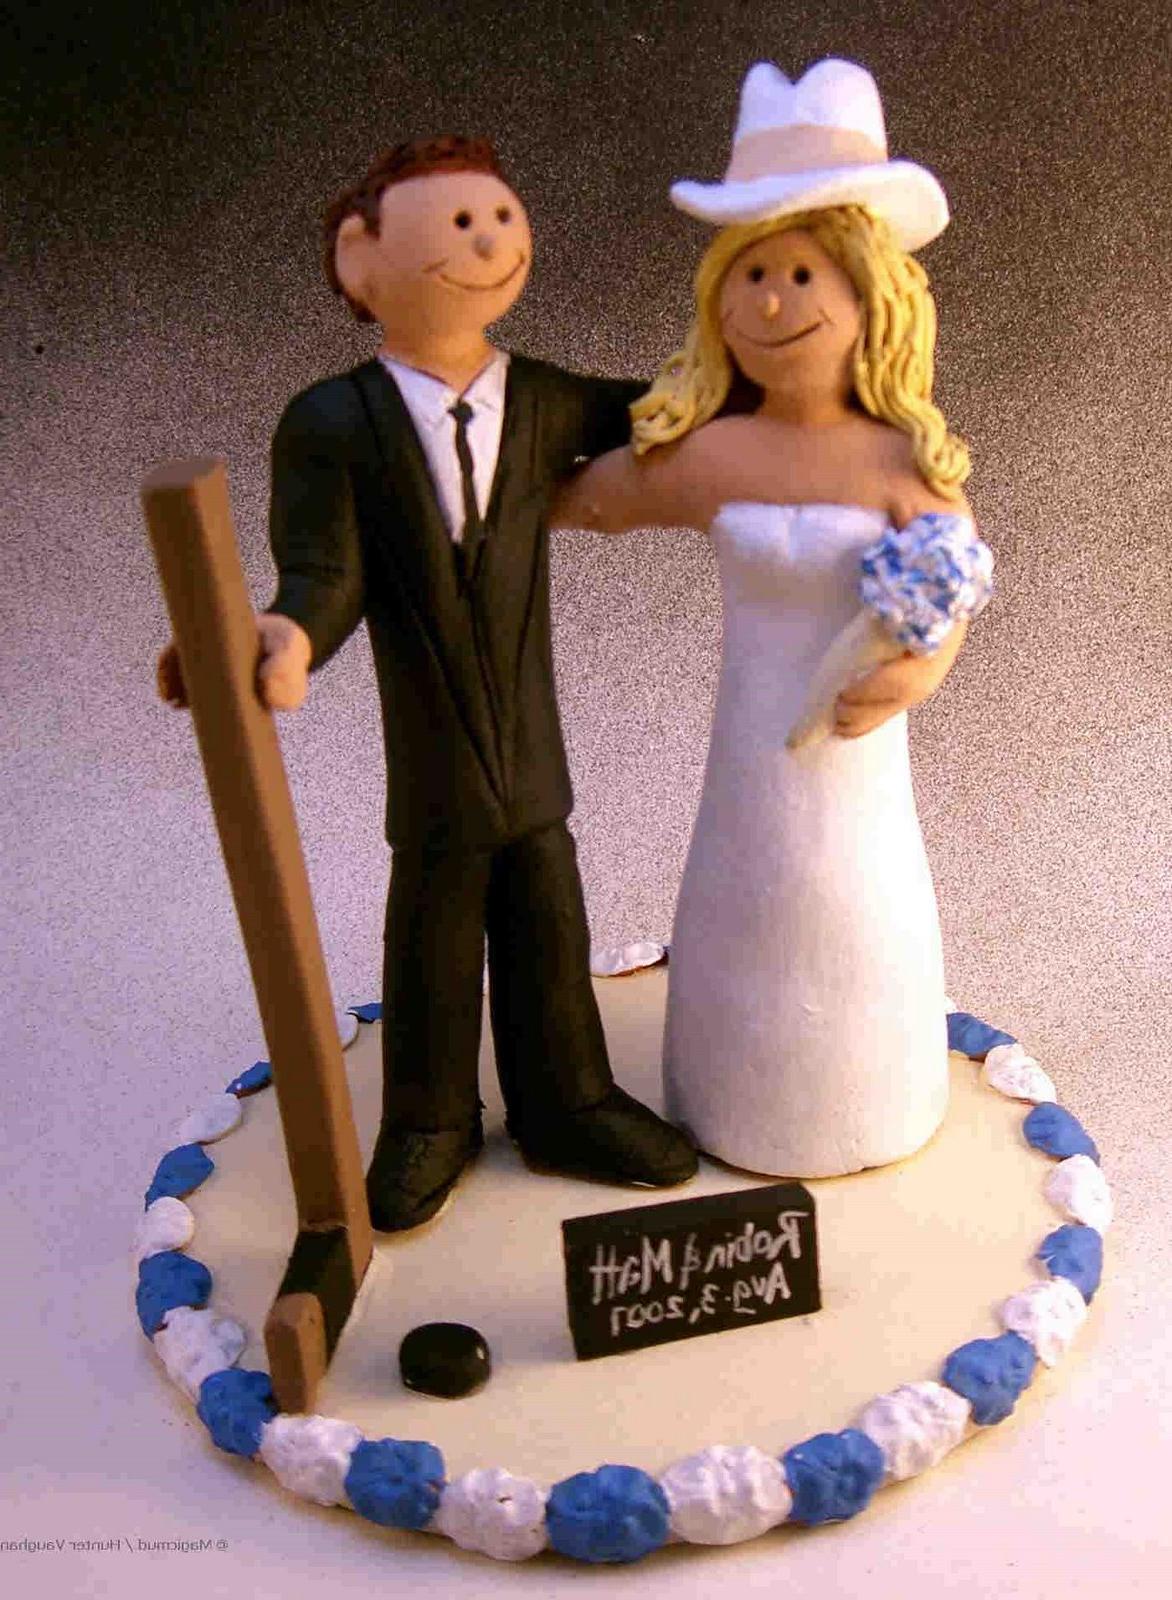 Wedding Cake Toppers have